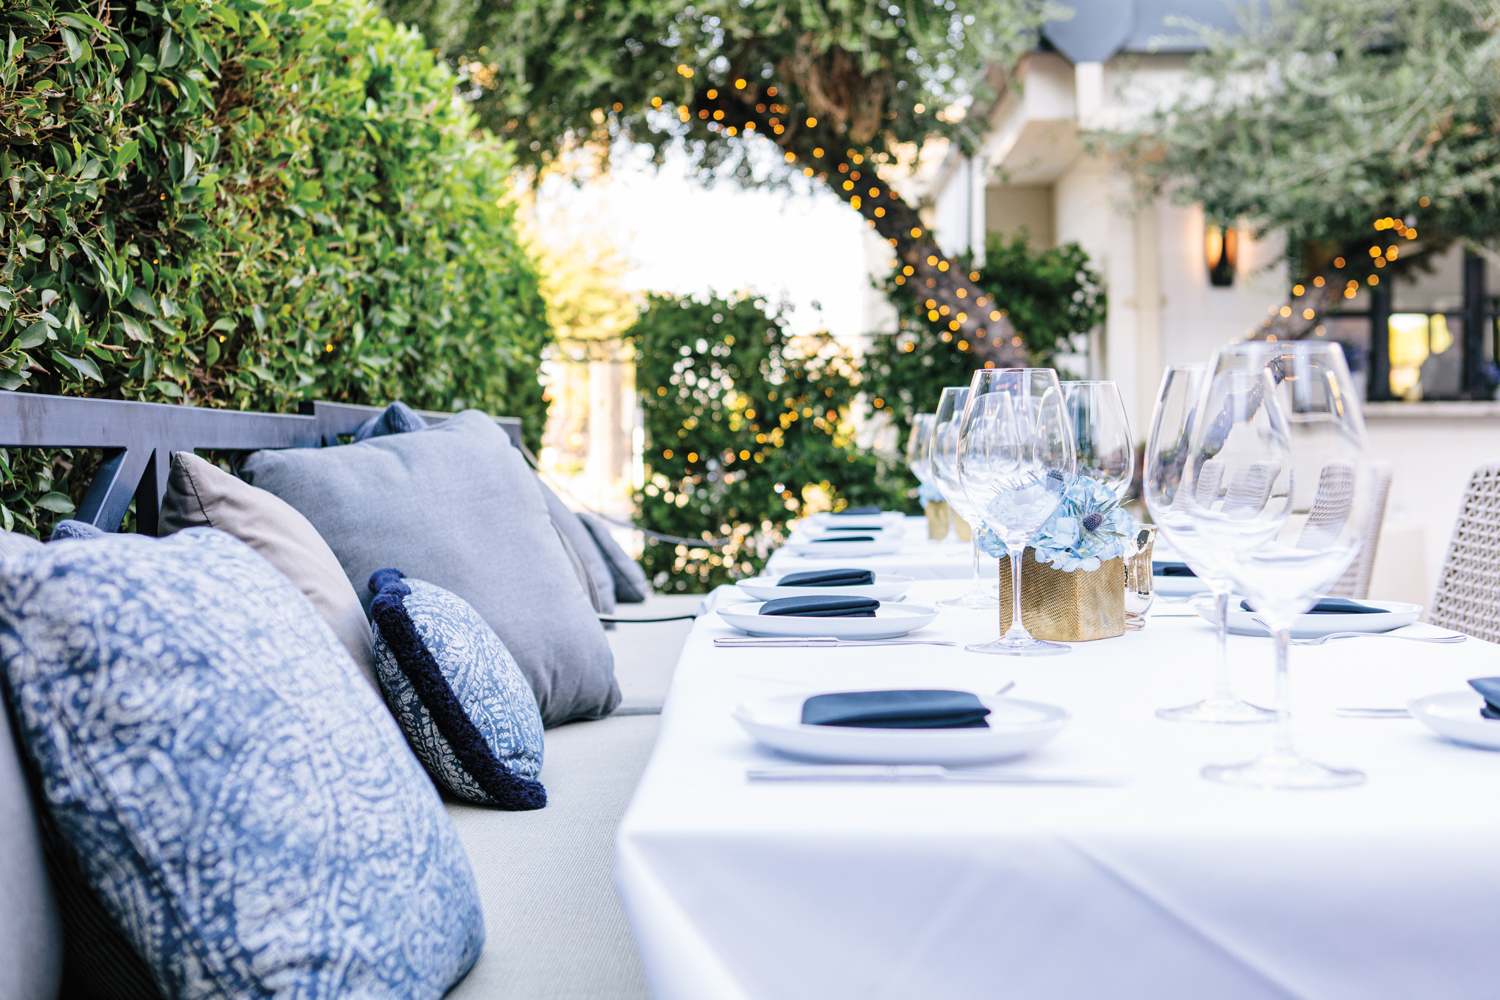 Outdoor dining area with white tablecloths, blue pillows and greenery suggested by Arizona design pros